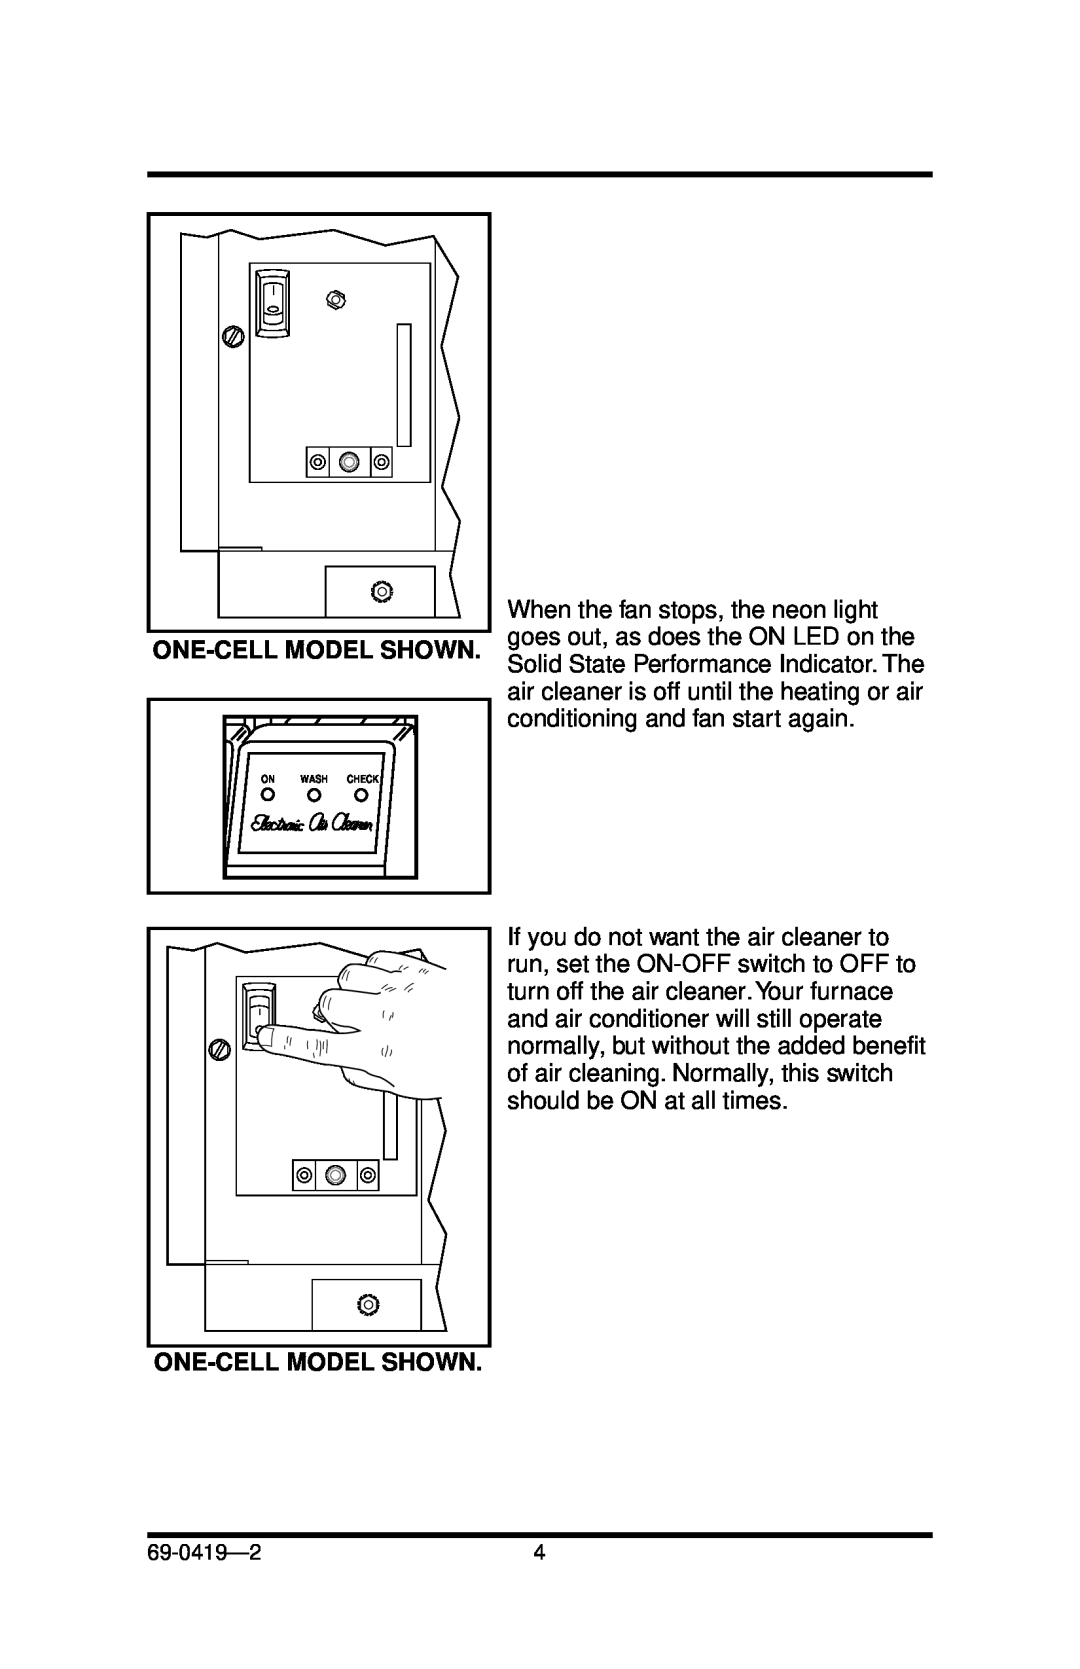 Honeywell F52F manual One-Cell Model Shown 